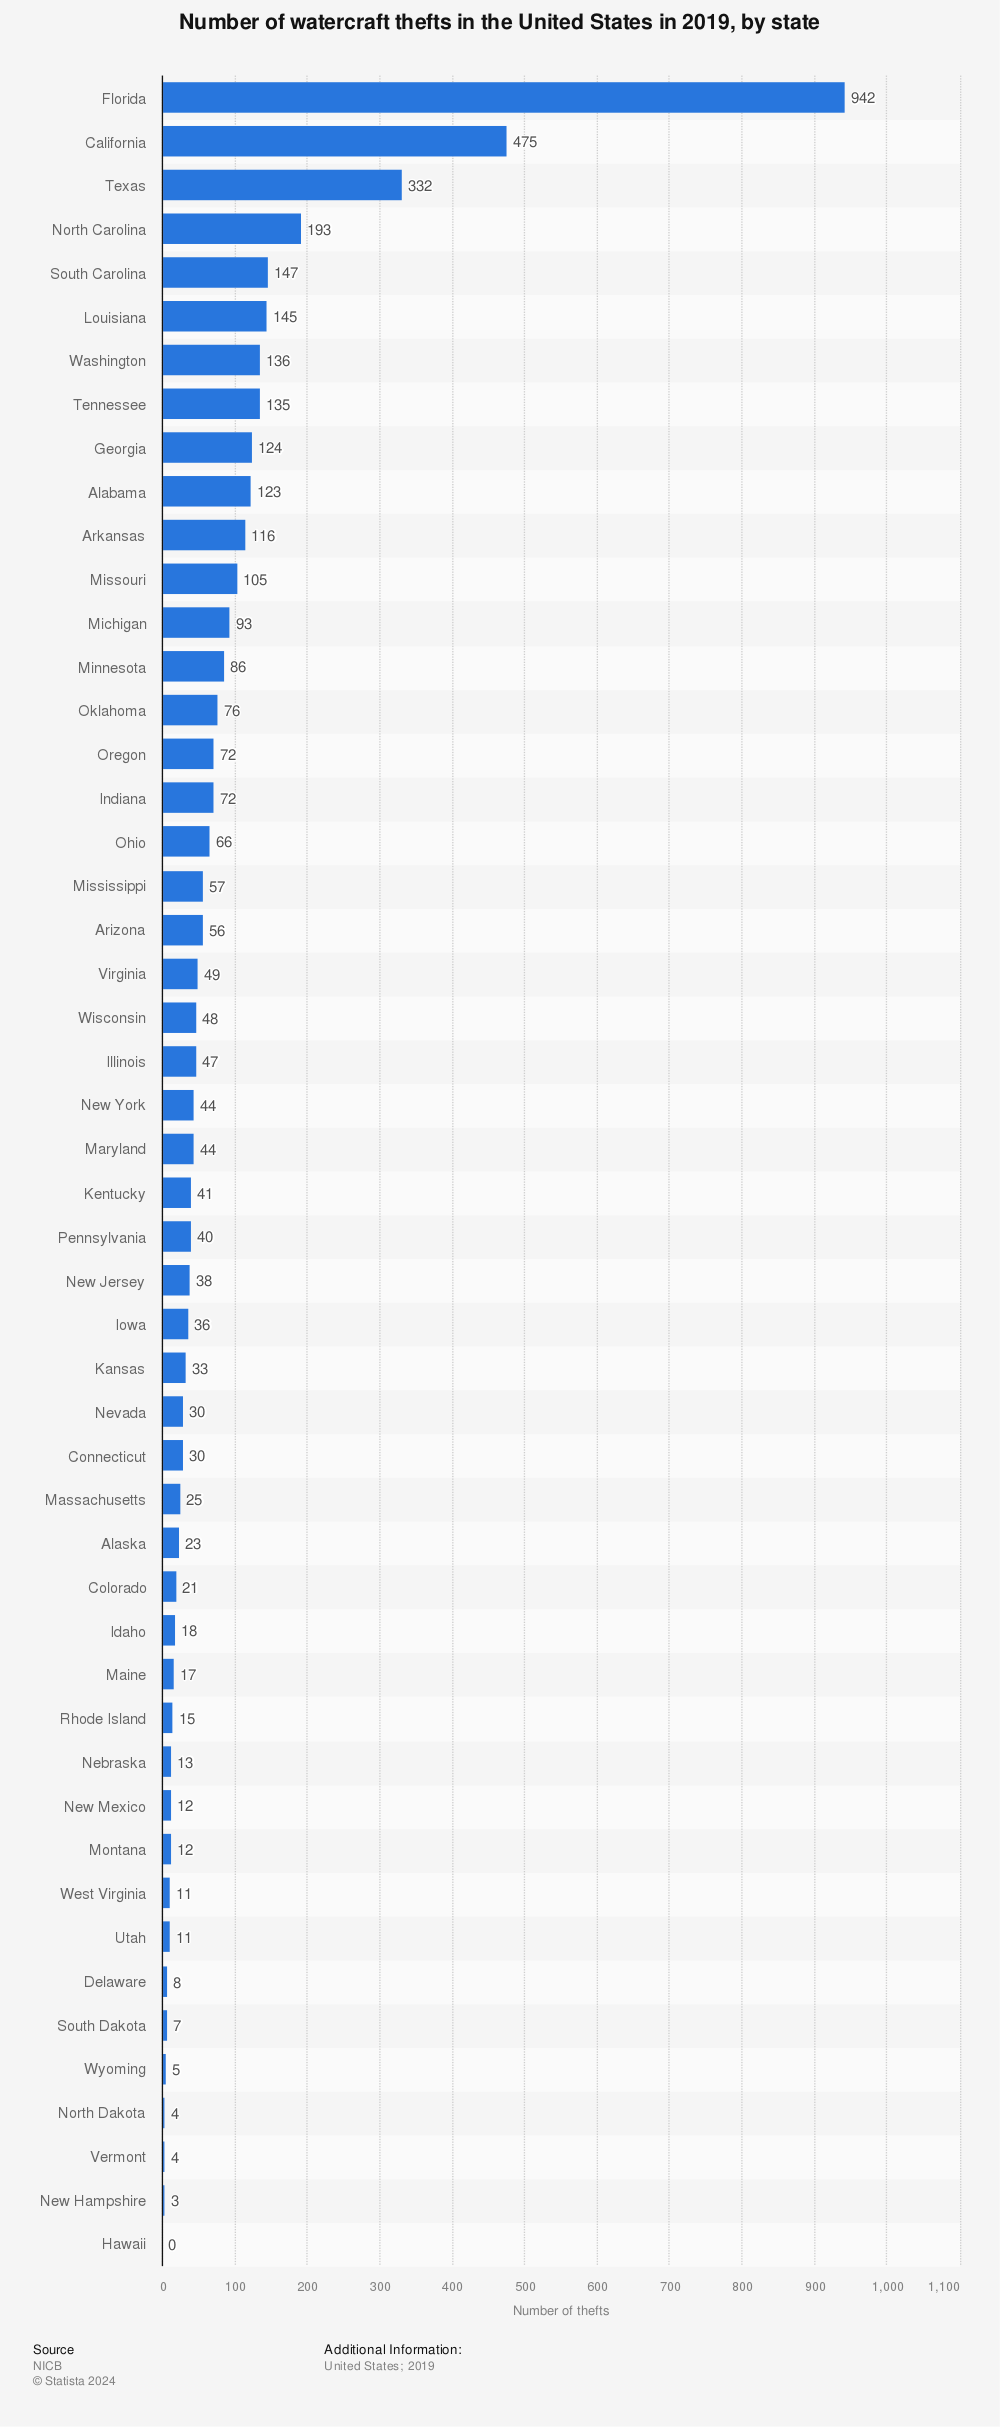 Statistic: Number of watercraft thefts in the United States in 2019, by state | Statista